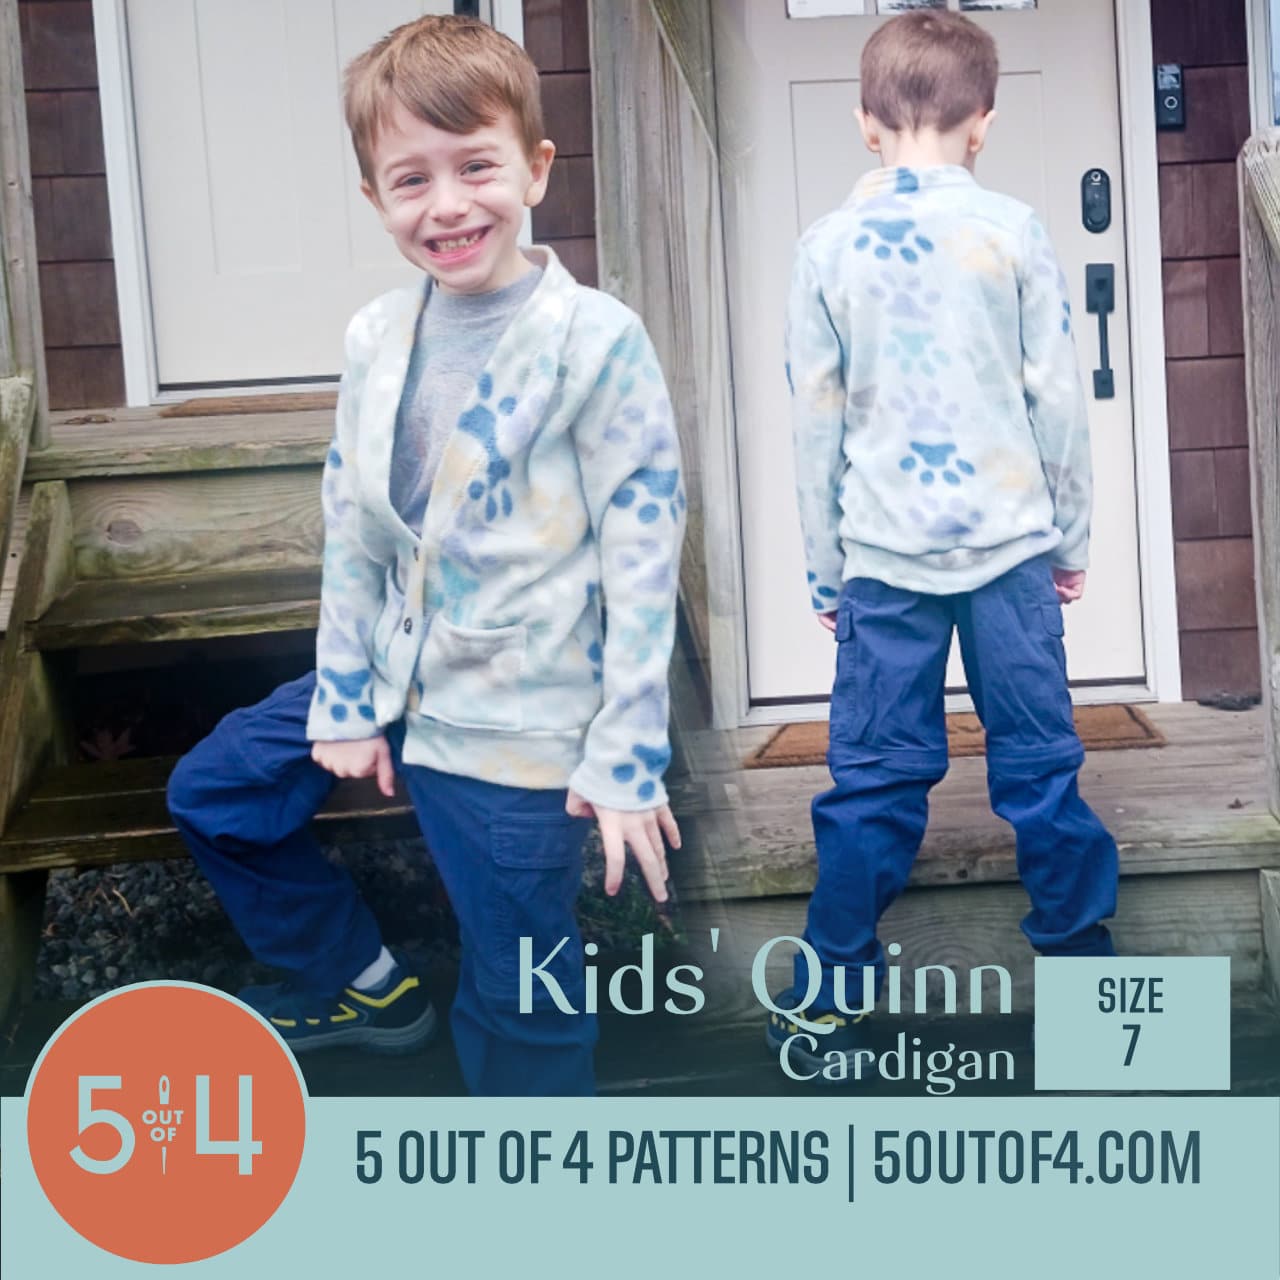 Kids' Quinn Cardigan - 5 out of 4 Patterns